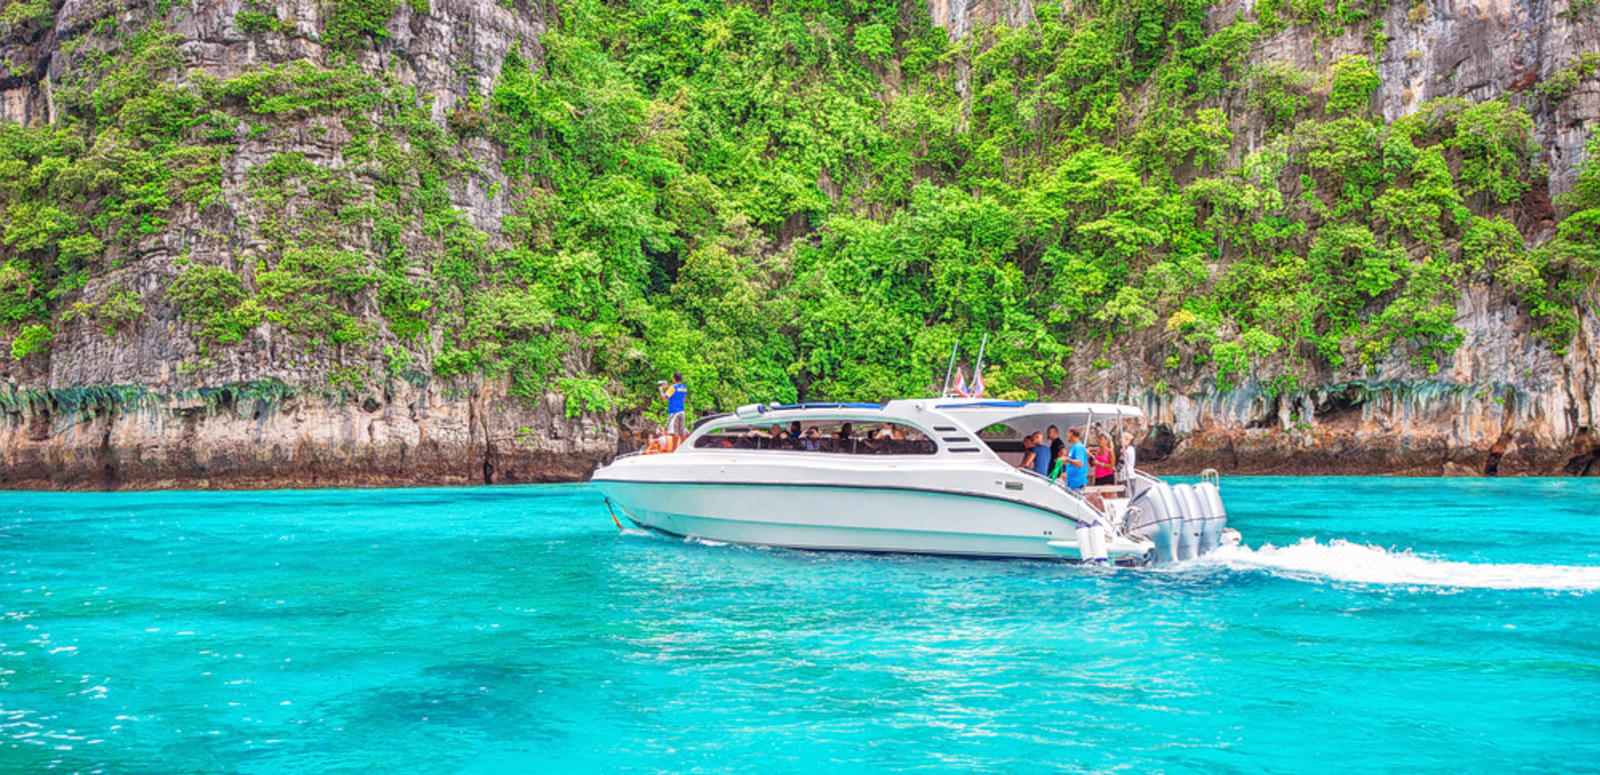 Get to Phi Phi Island by Speeboat